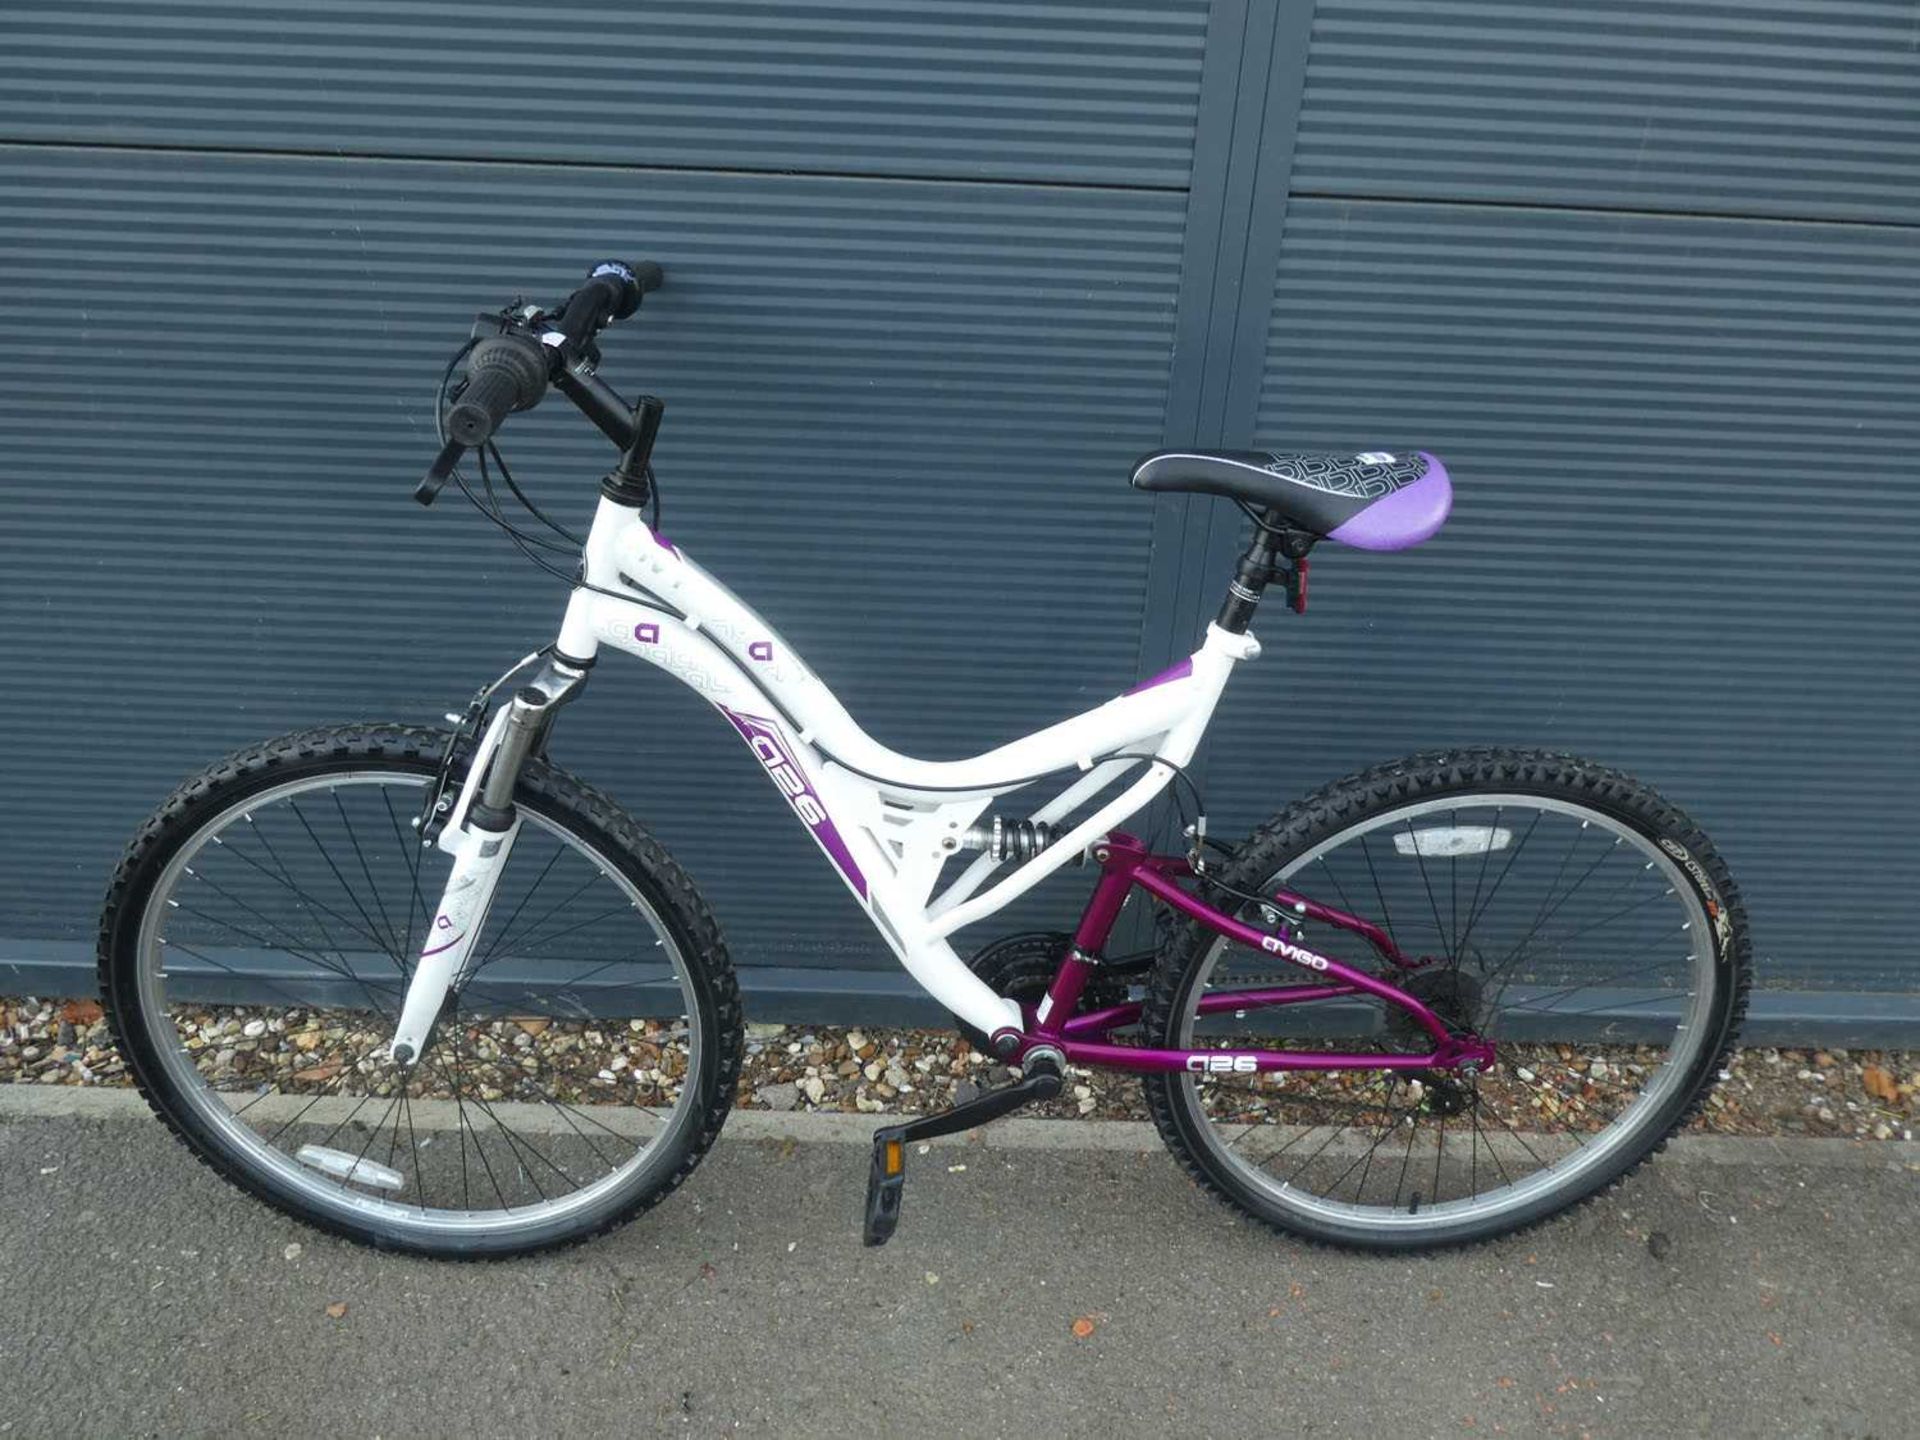 CT Vigo Ivy ladies full suspension mountain cycle in white and purple